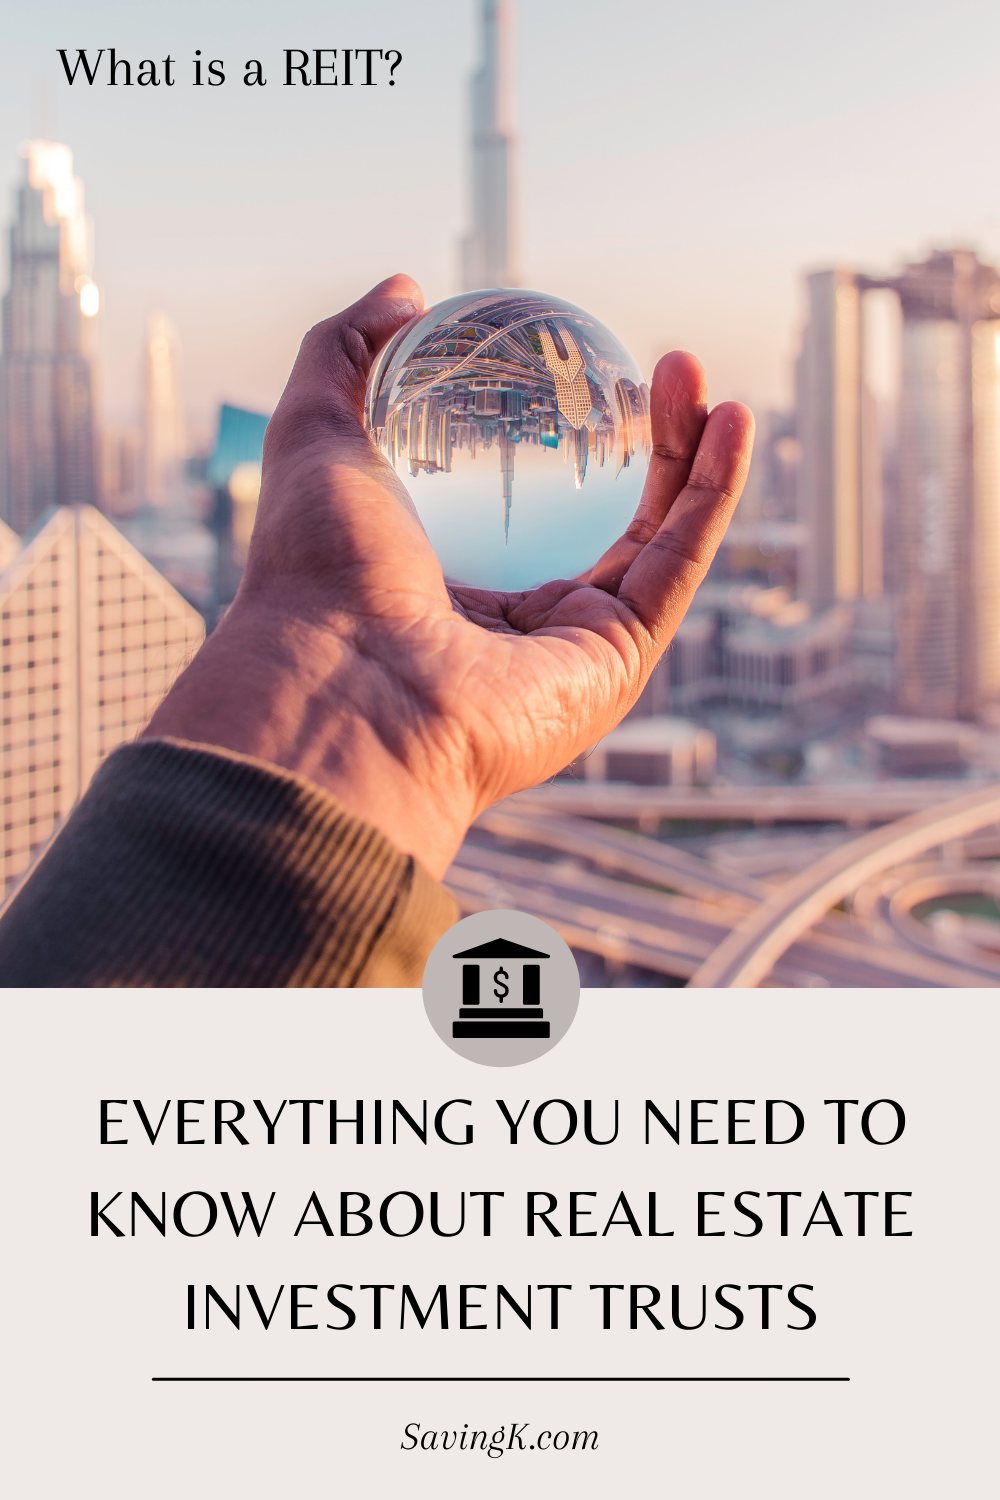 What Is A REIT or Real Estate Investment Trust